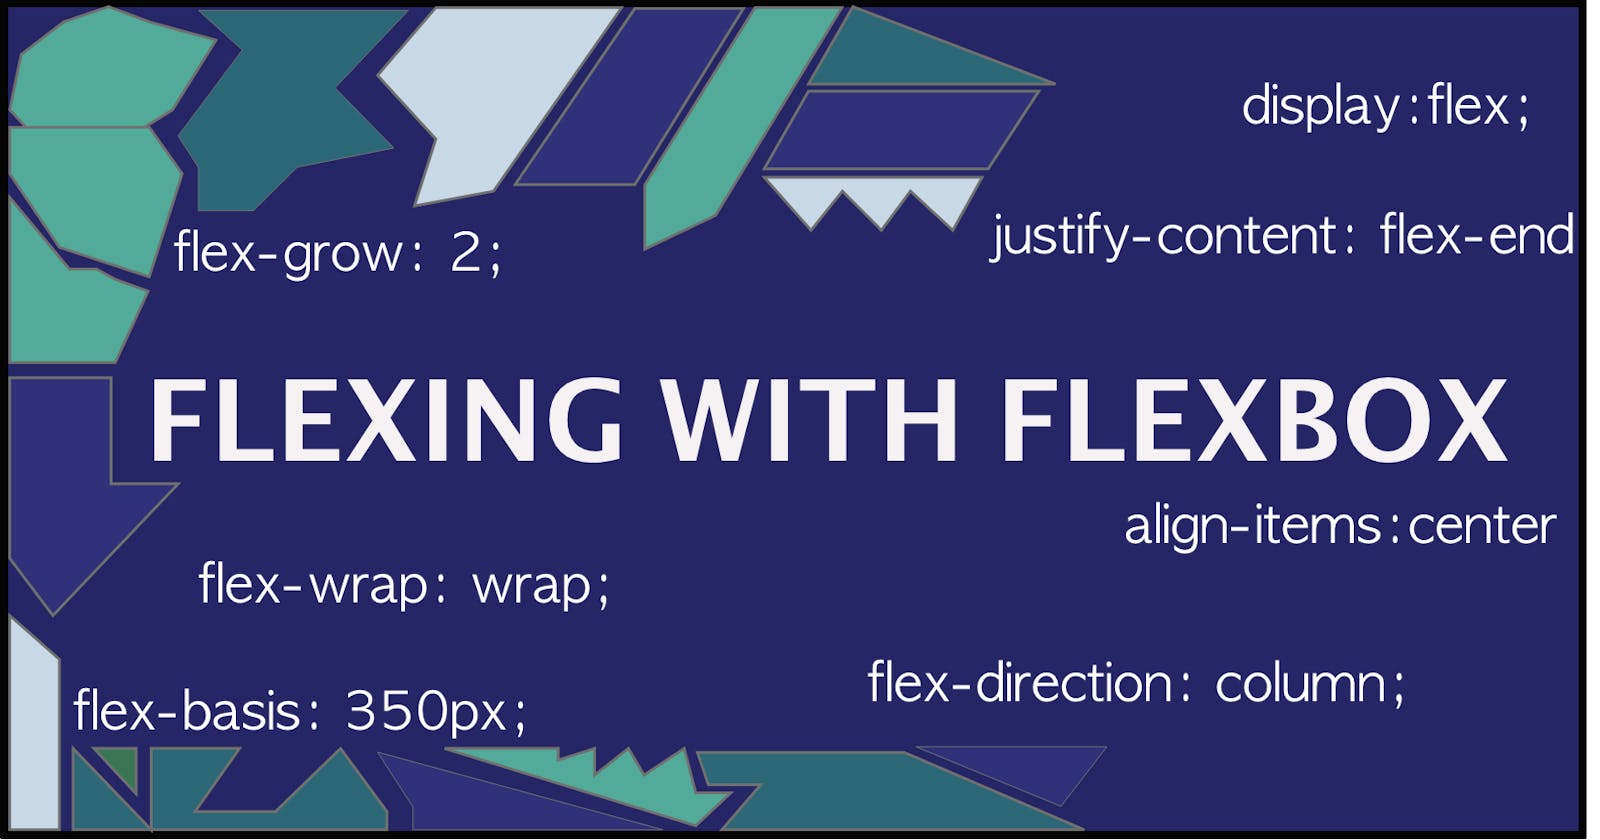 How much can I flex with Flexbox?